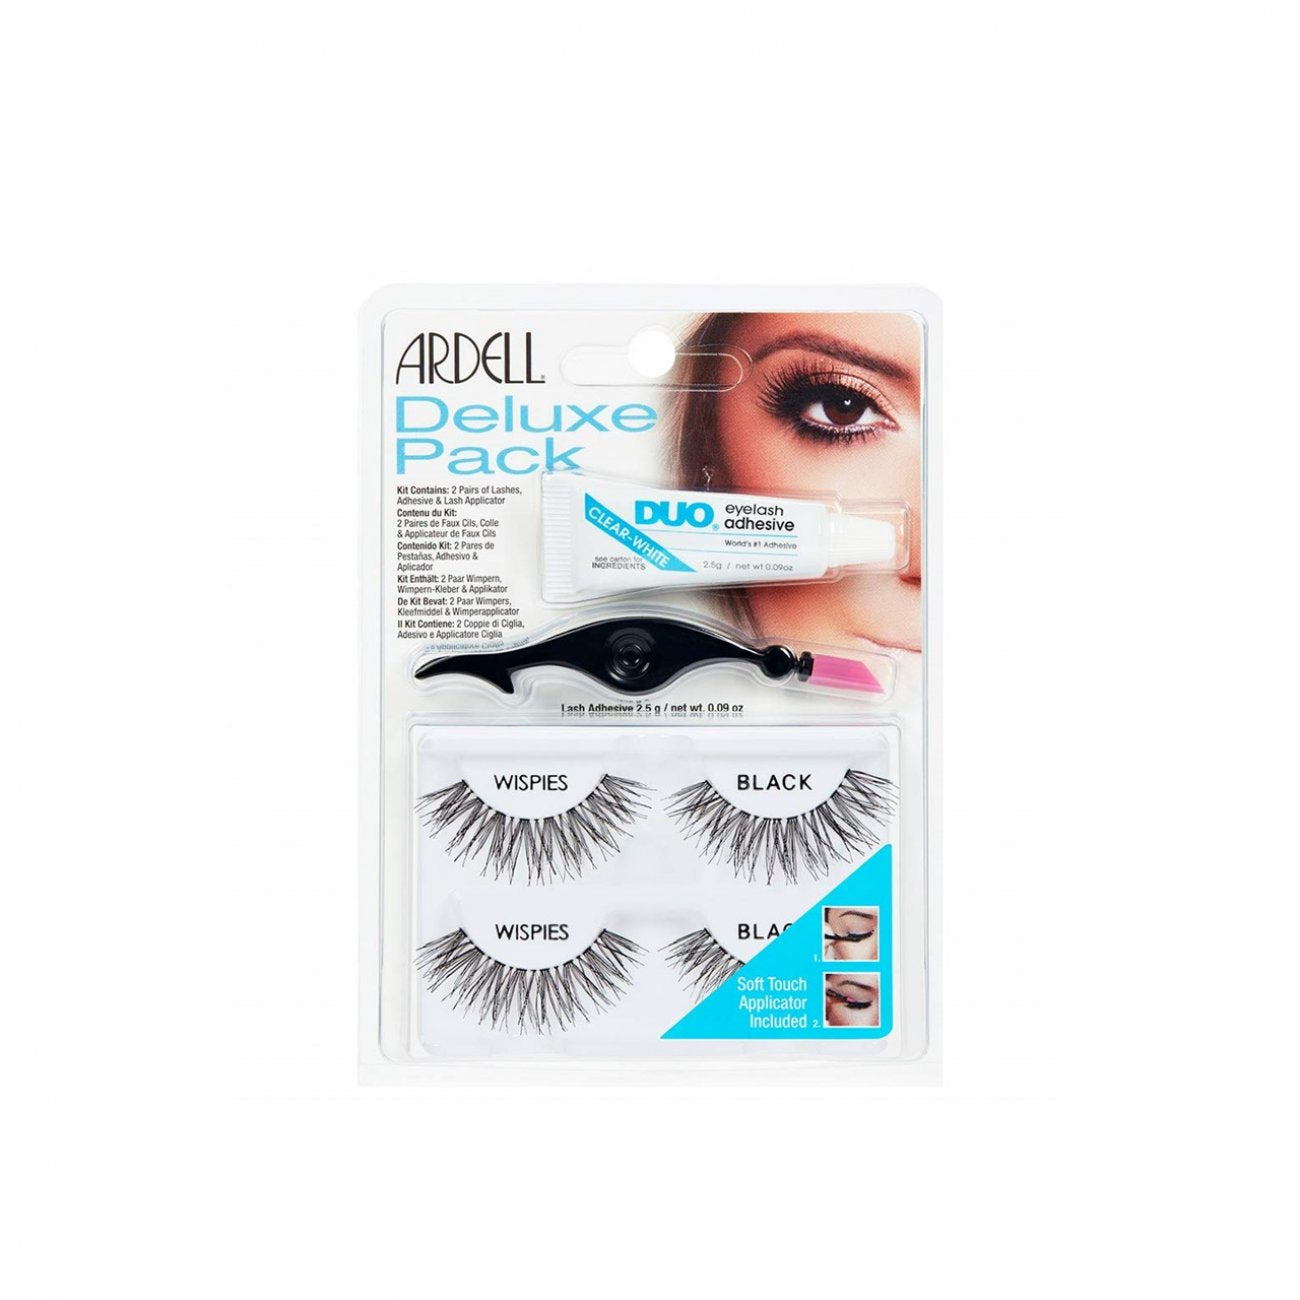 PROMOTIONAL PACK:Ardell Deluxe Pack Lashes Wispies Black with Aplicator